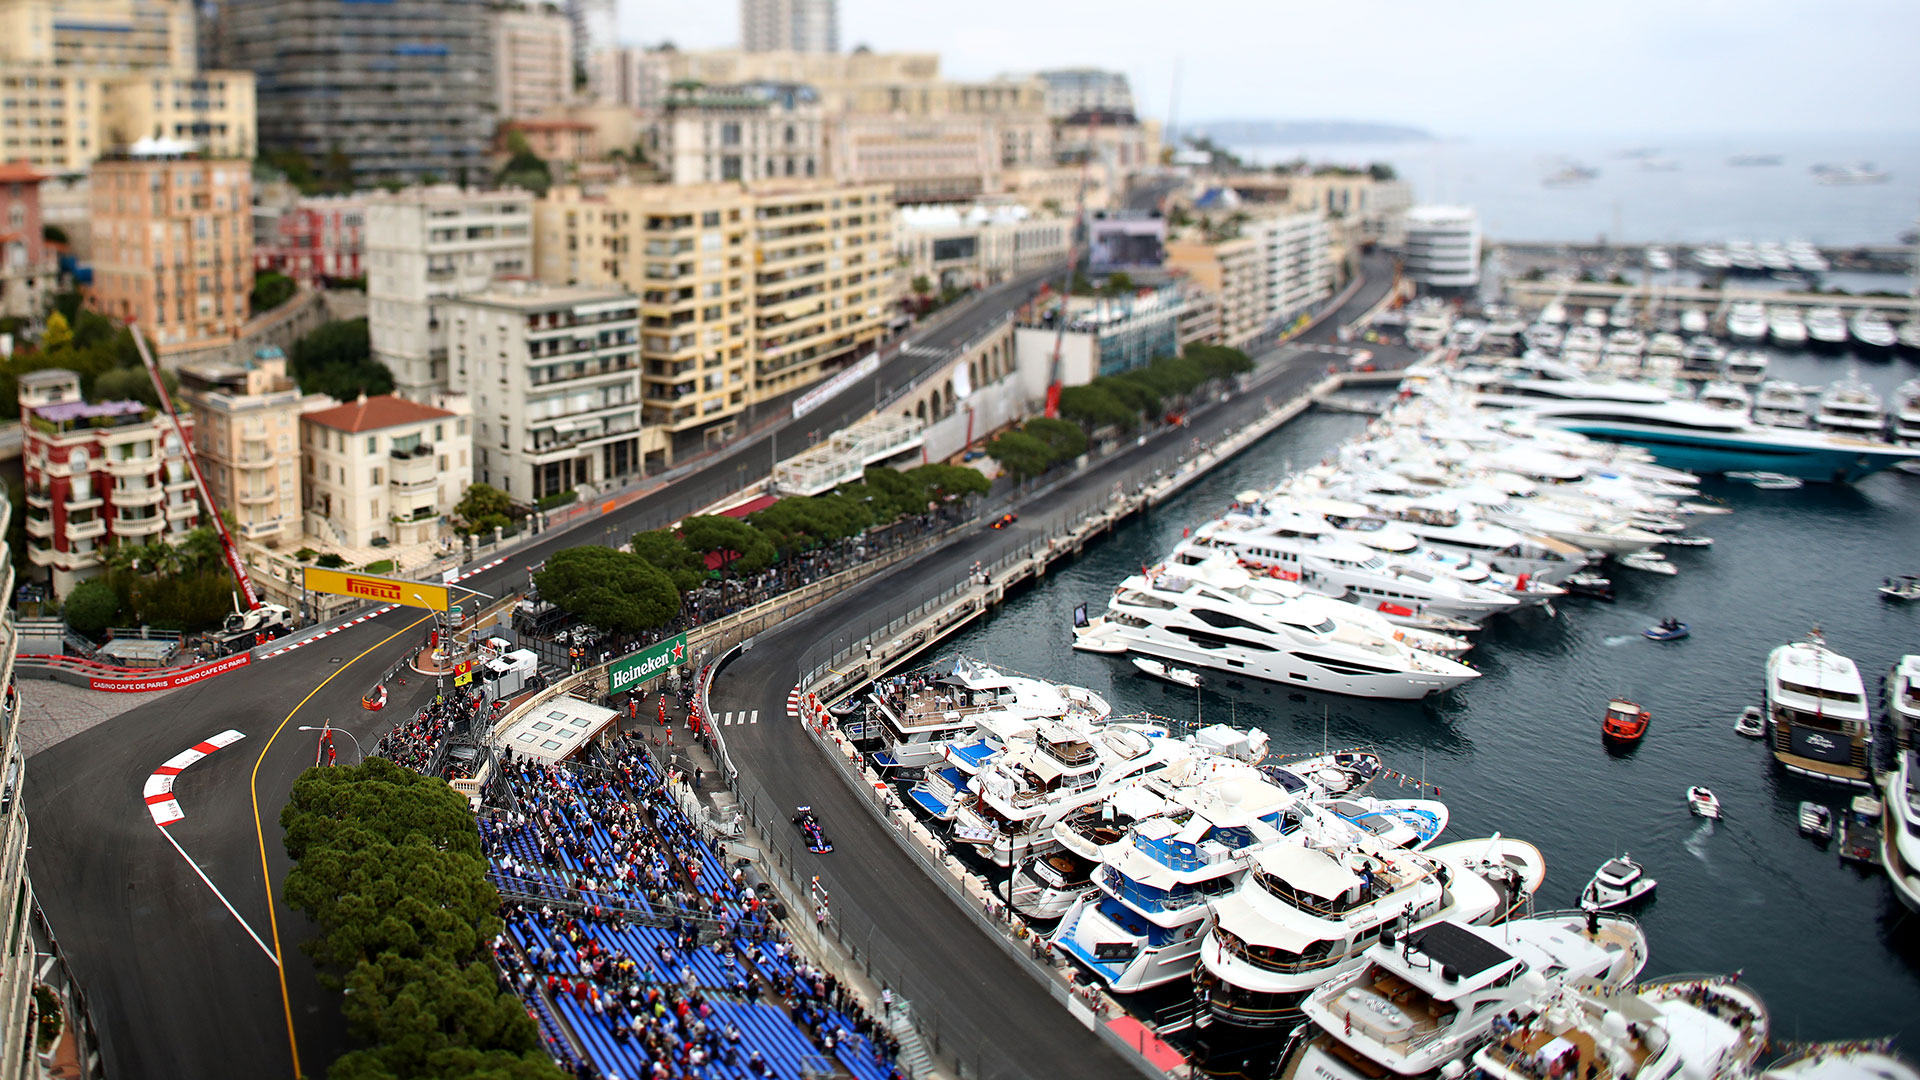 Monaco outfit interested in joining the F1 grid